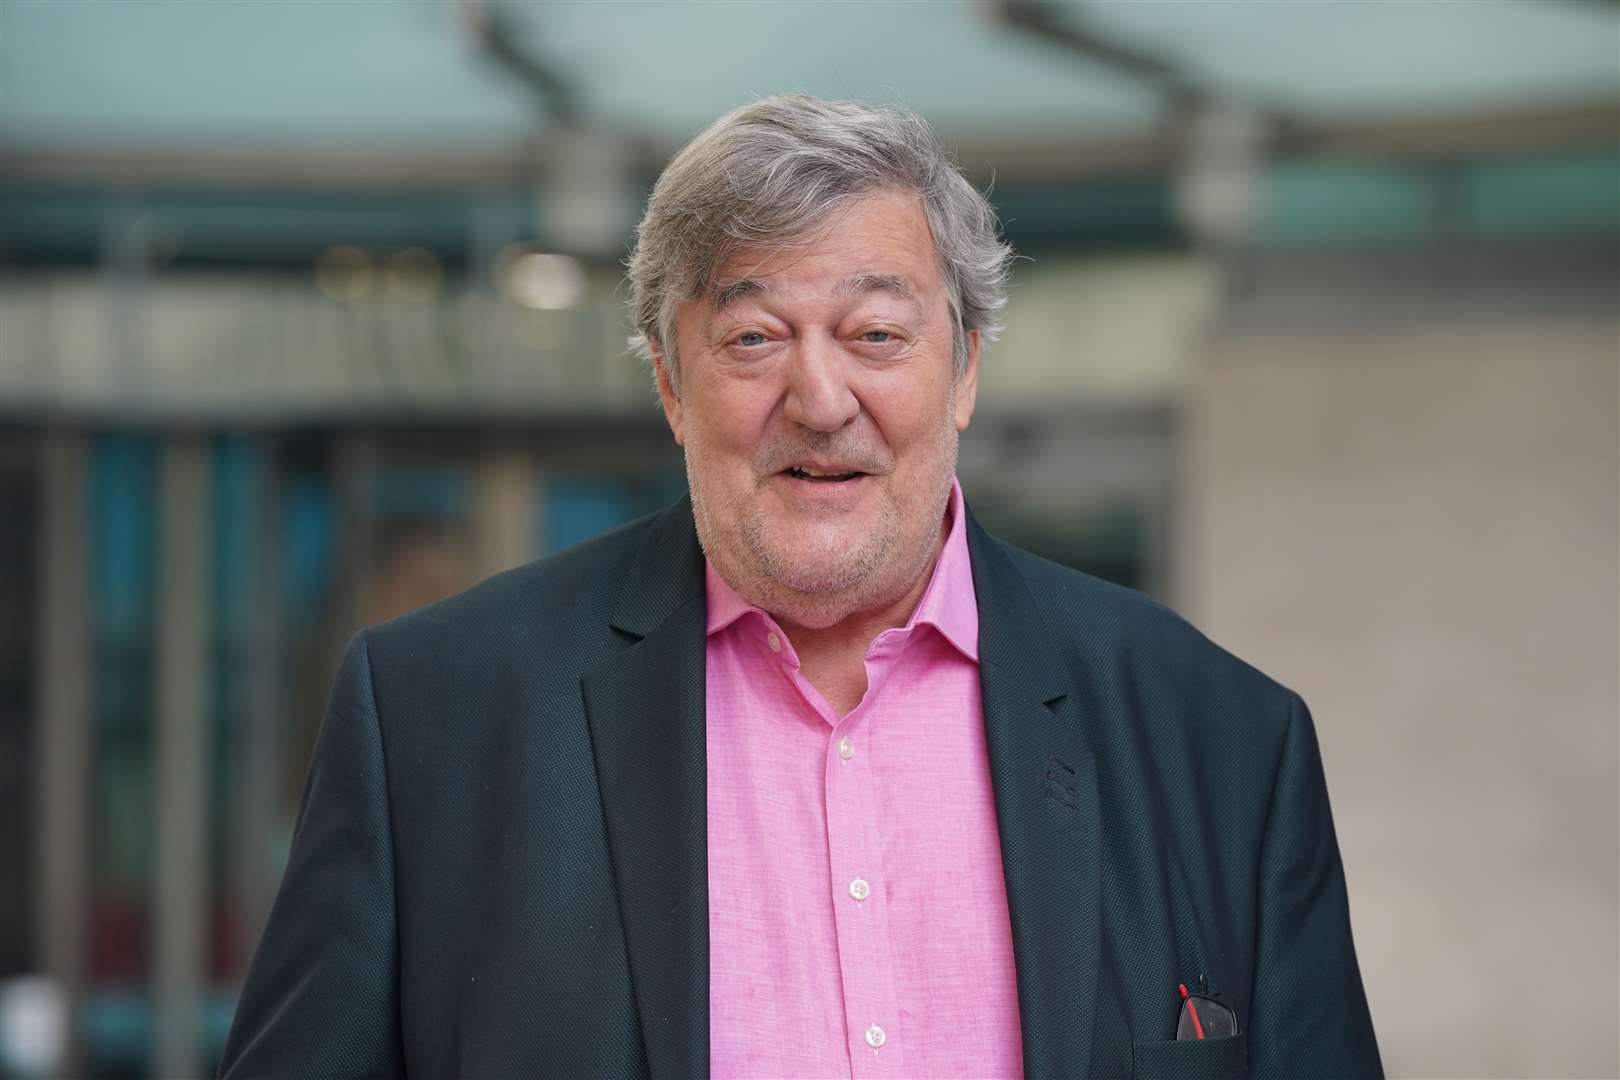 Stephen Fry said ‘unless I’m missing something, I think he has paid the price’ (Lucy North/PA)